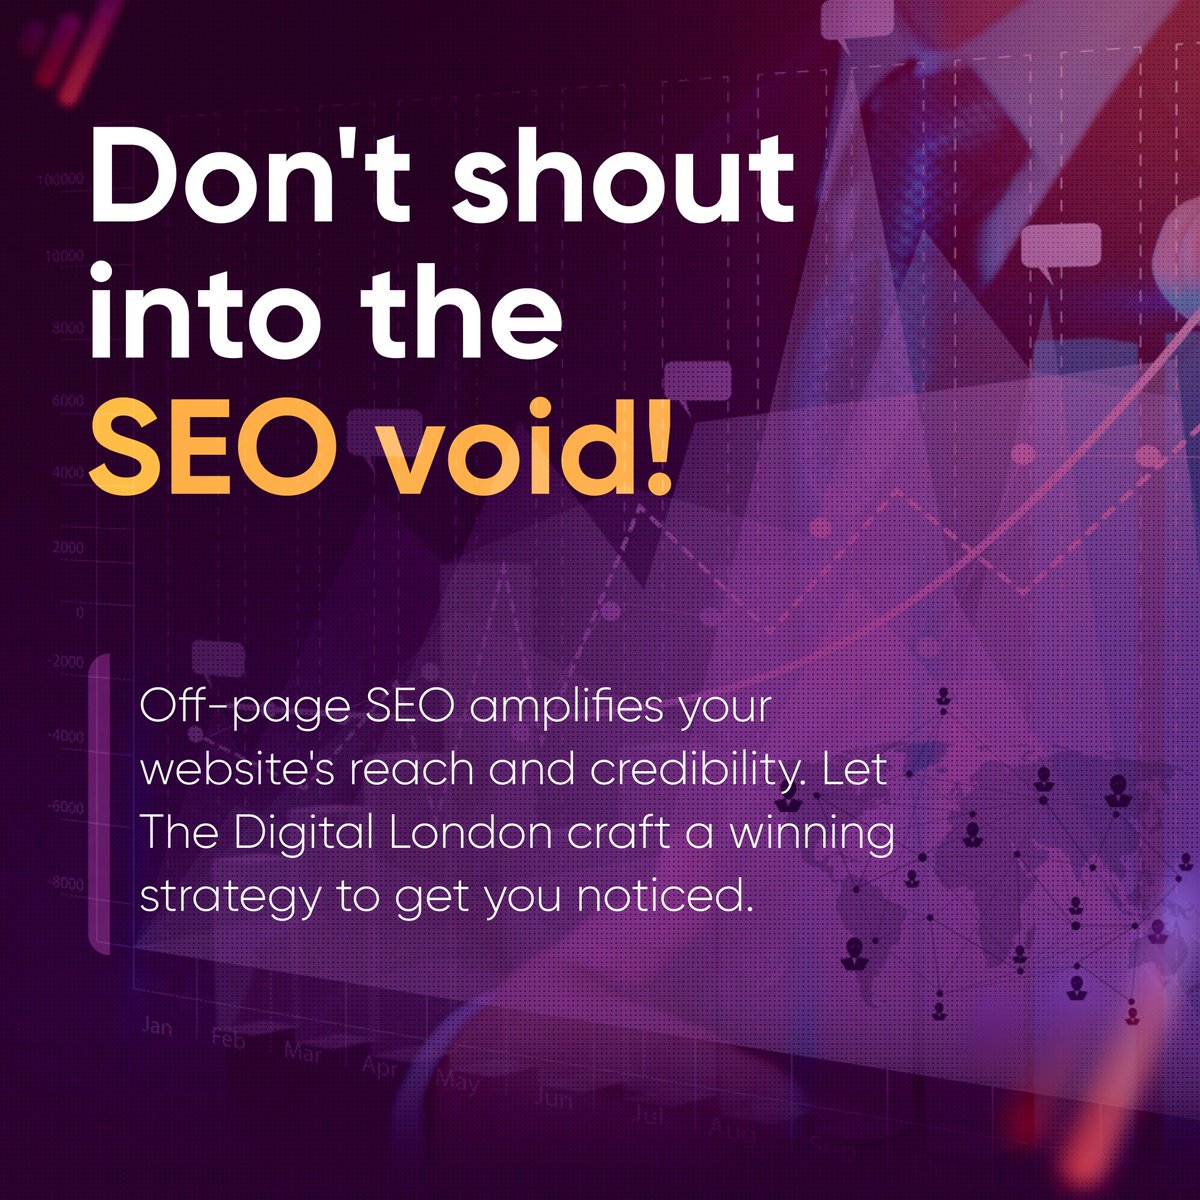 Stop wasting time on ineffective SEO strategies. Let us help you get noticed with targeted, effective plans. #SEO #DigitalMarketing #OnlineVisibility #ExpertSEO #SearchEngineOptimization #SEOHelp #GetNoticed
For more information visit our website: thedigitallondon.com